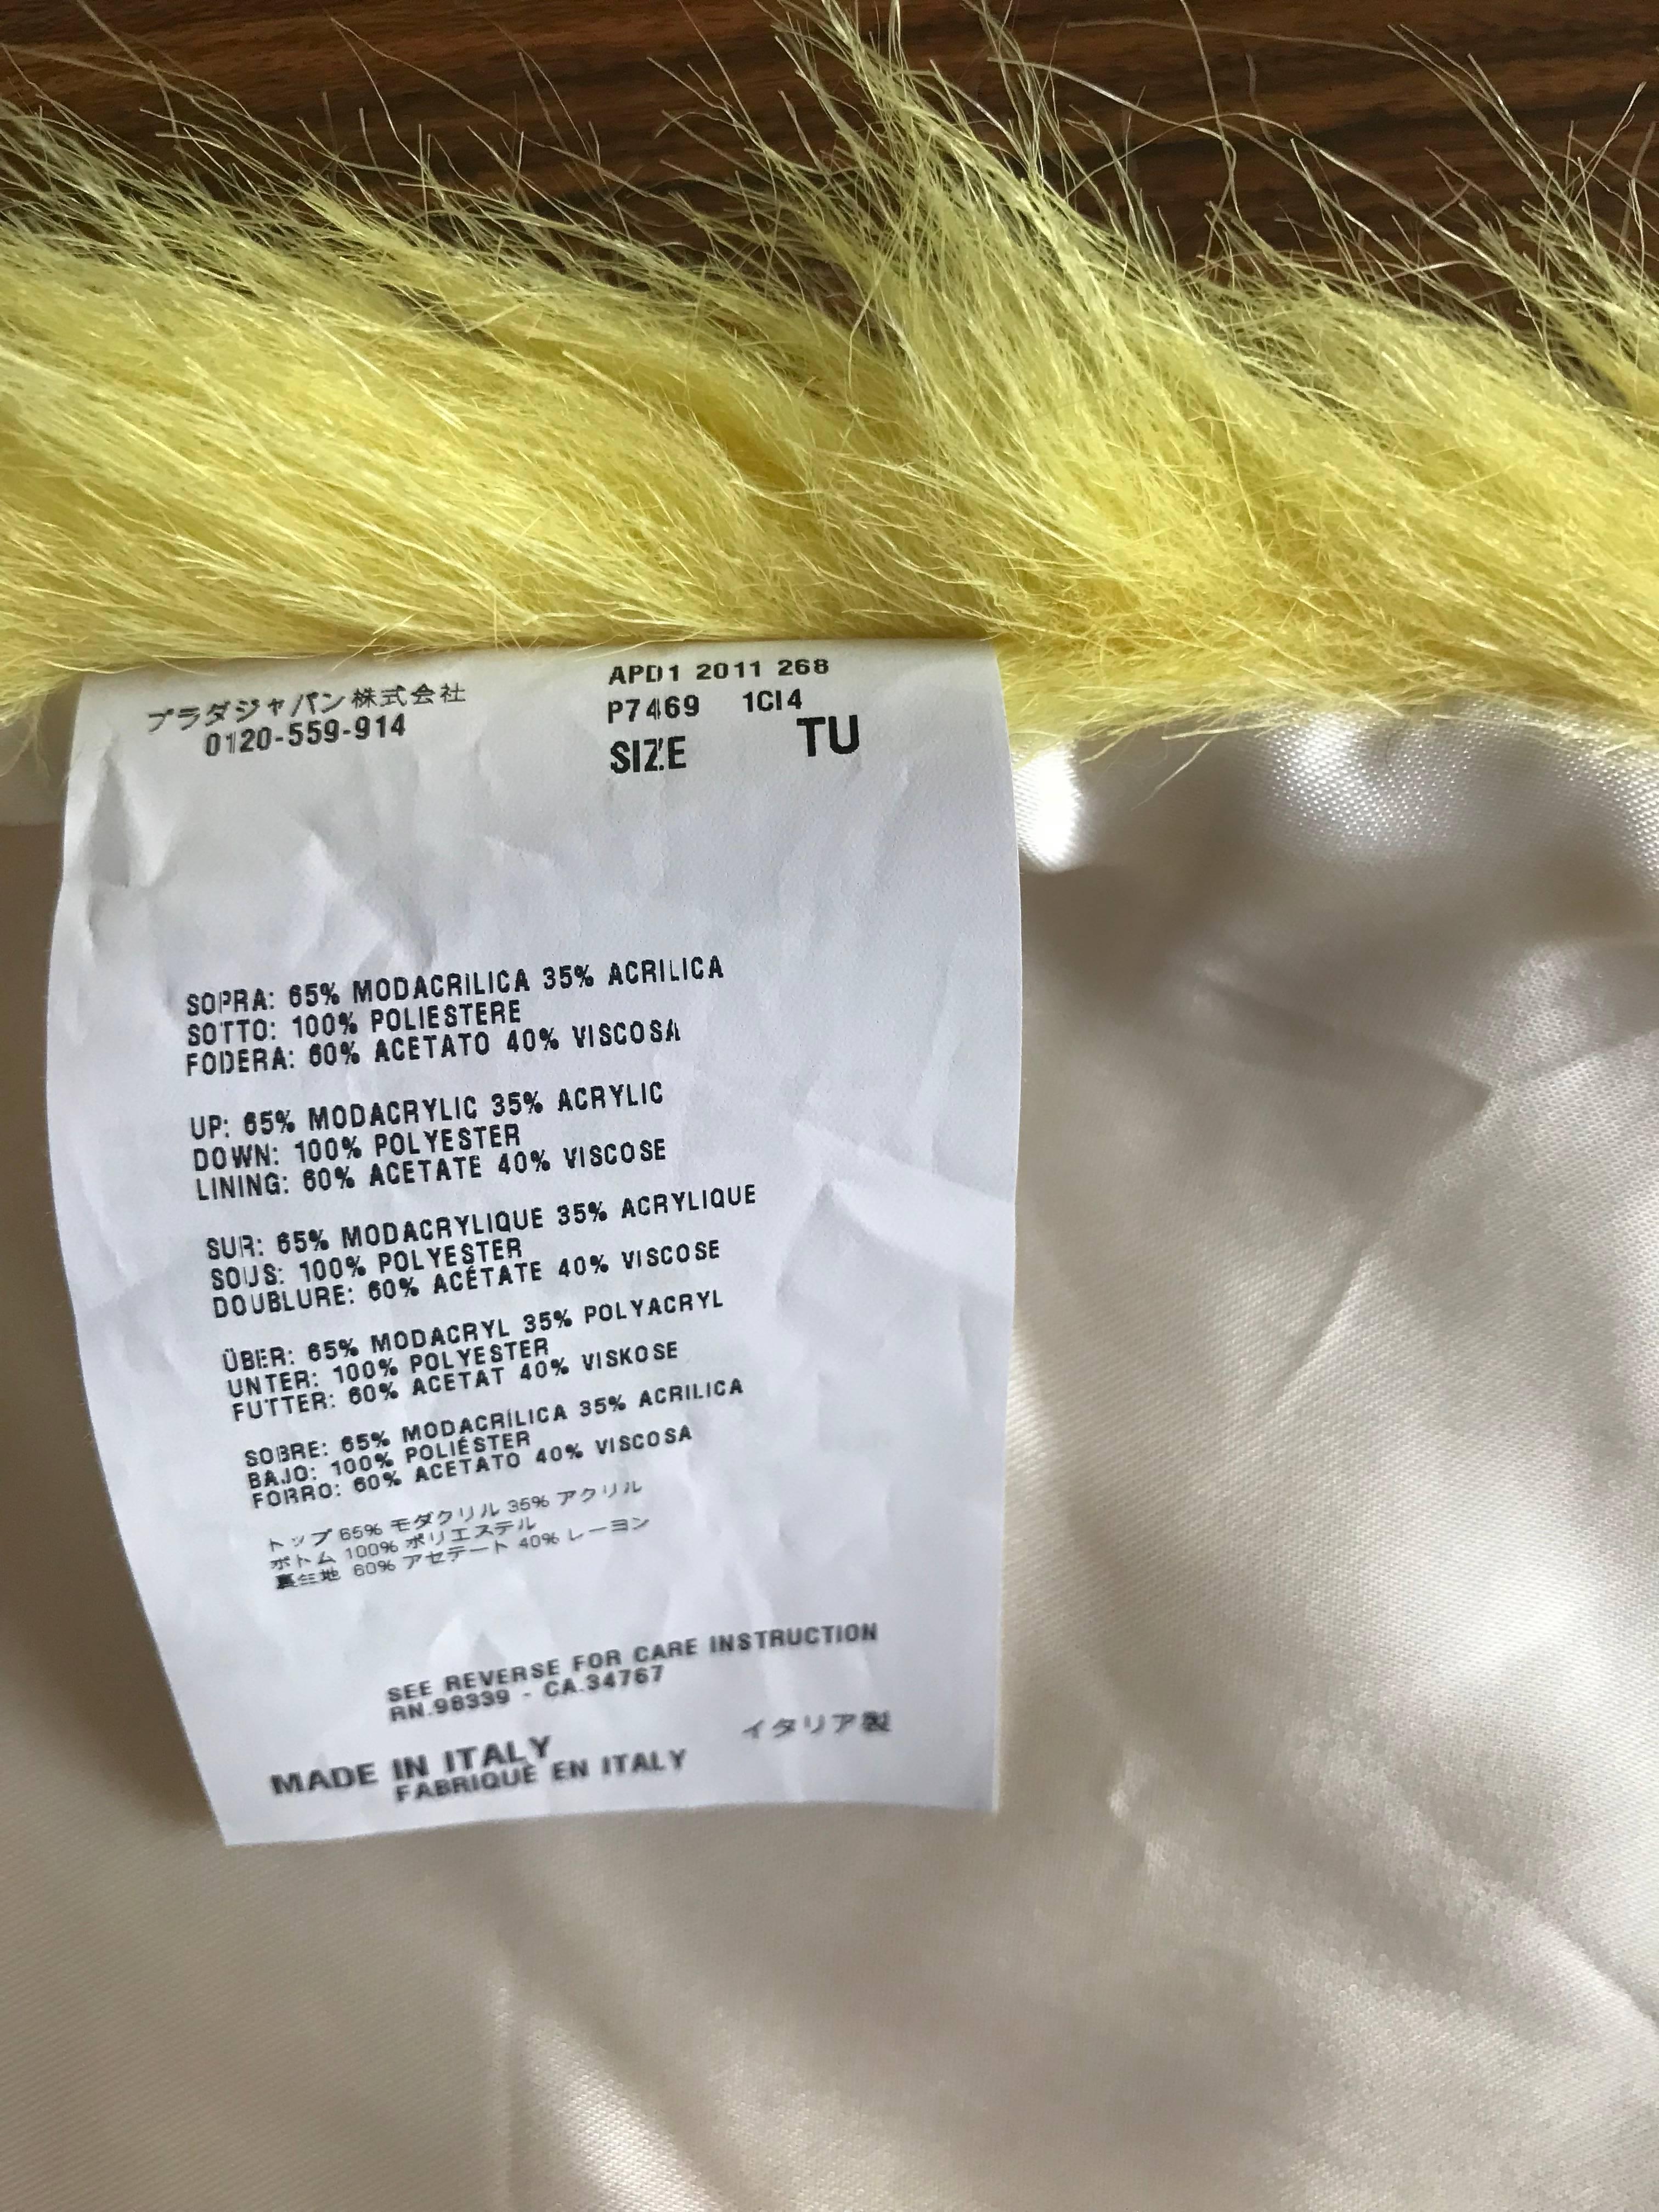 Beige Prada 2011 Runway Yellow and White Faux Fur Stole Scarf Wrap